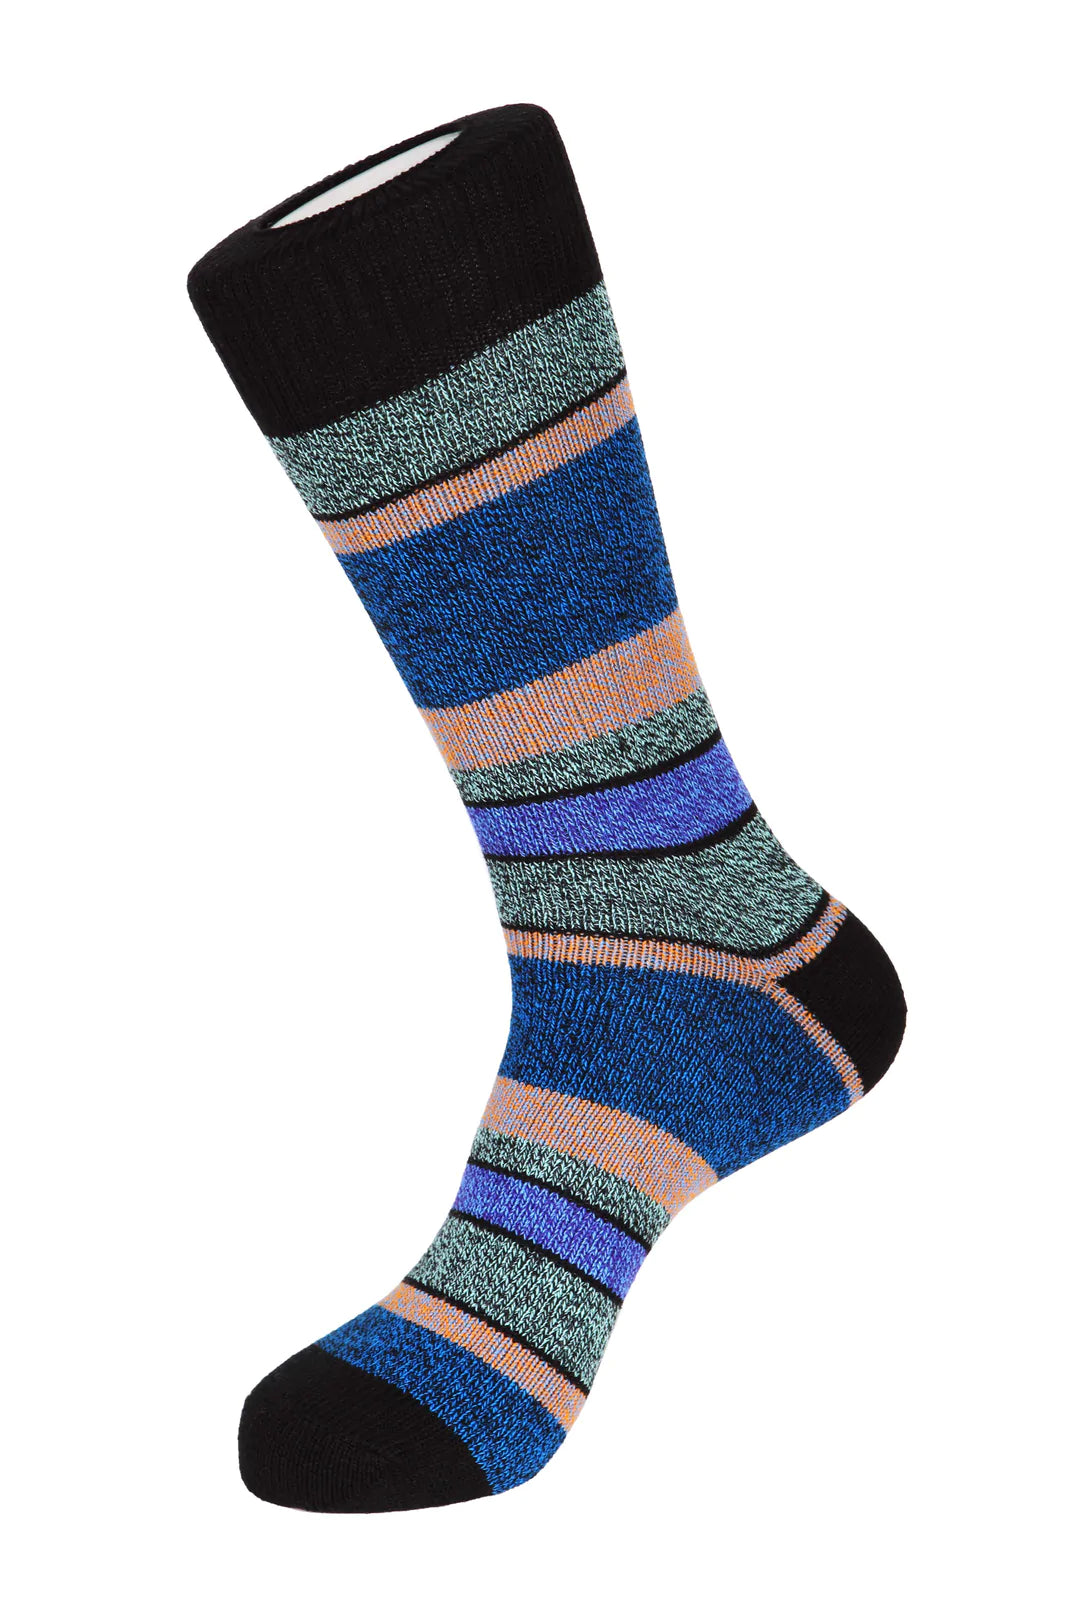 Unsimply Stitched blue and black boot socks with multi colored stripes, making it a great pairing with DFR89 blue denim jeans and a fun Sugar sport shirt.